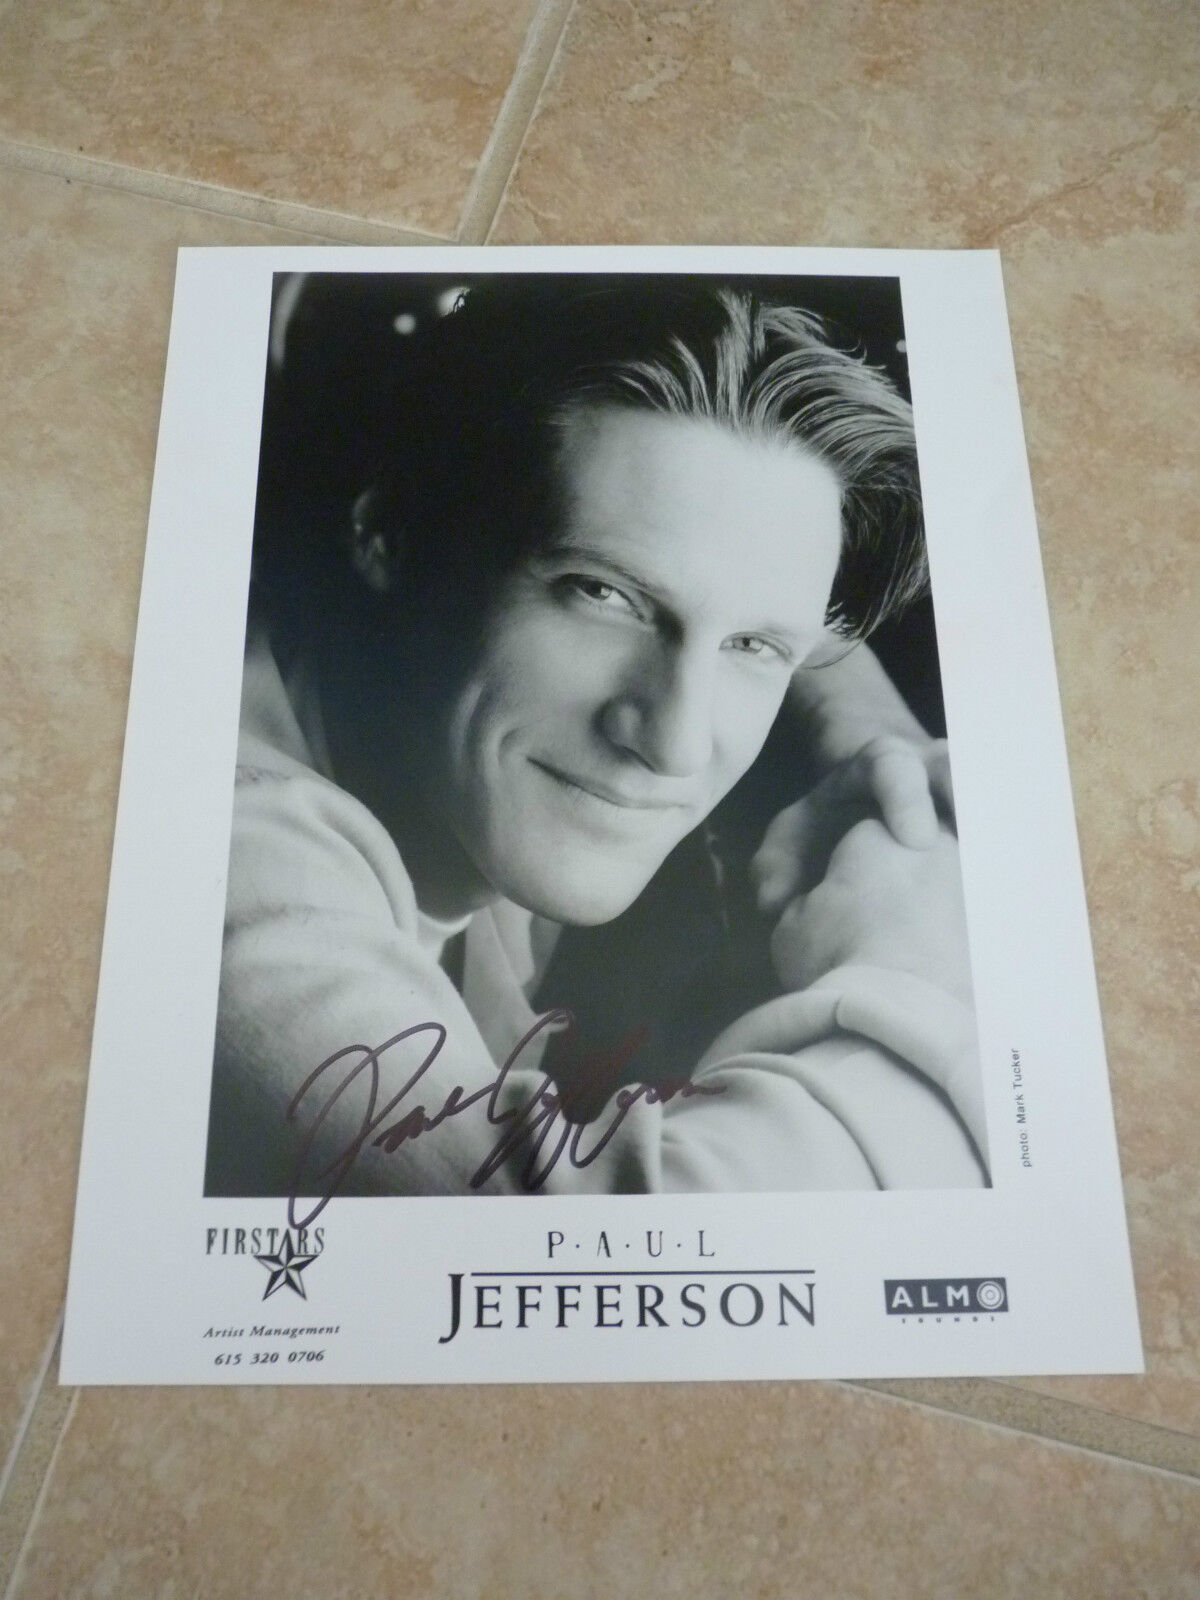 Paul Jefferson Country Music Signed Autograph Promo Photo Poster painting 8x10